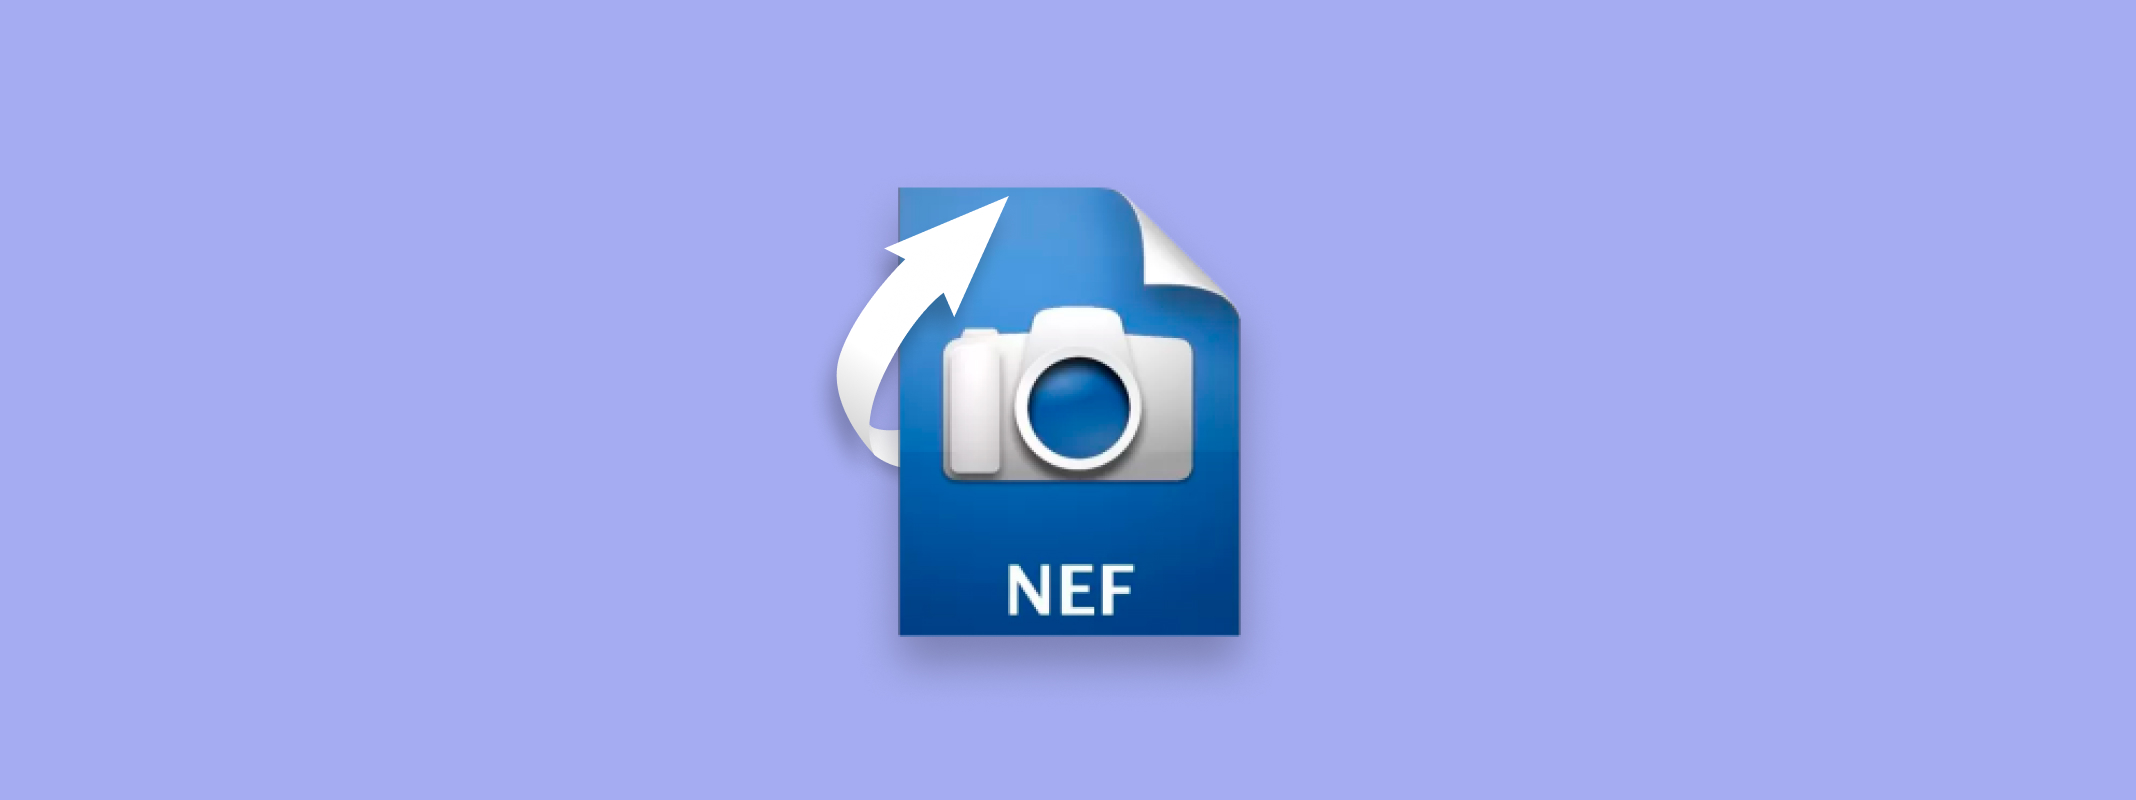 recover deleted nef files